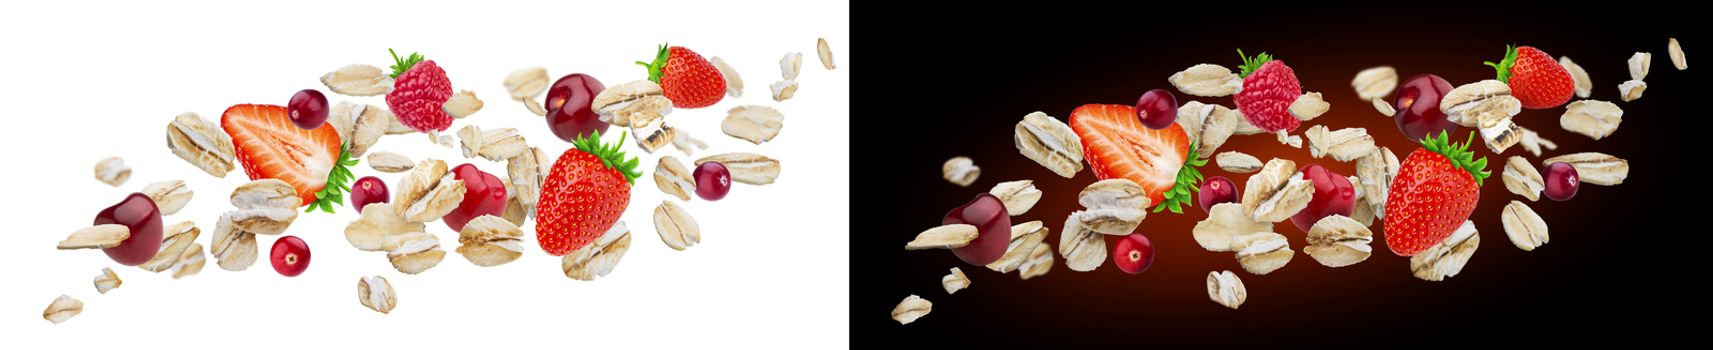 Flying oat flakes with berries isolated on white and black backgrounds. Falling oats